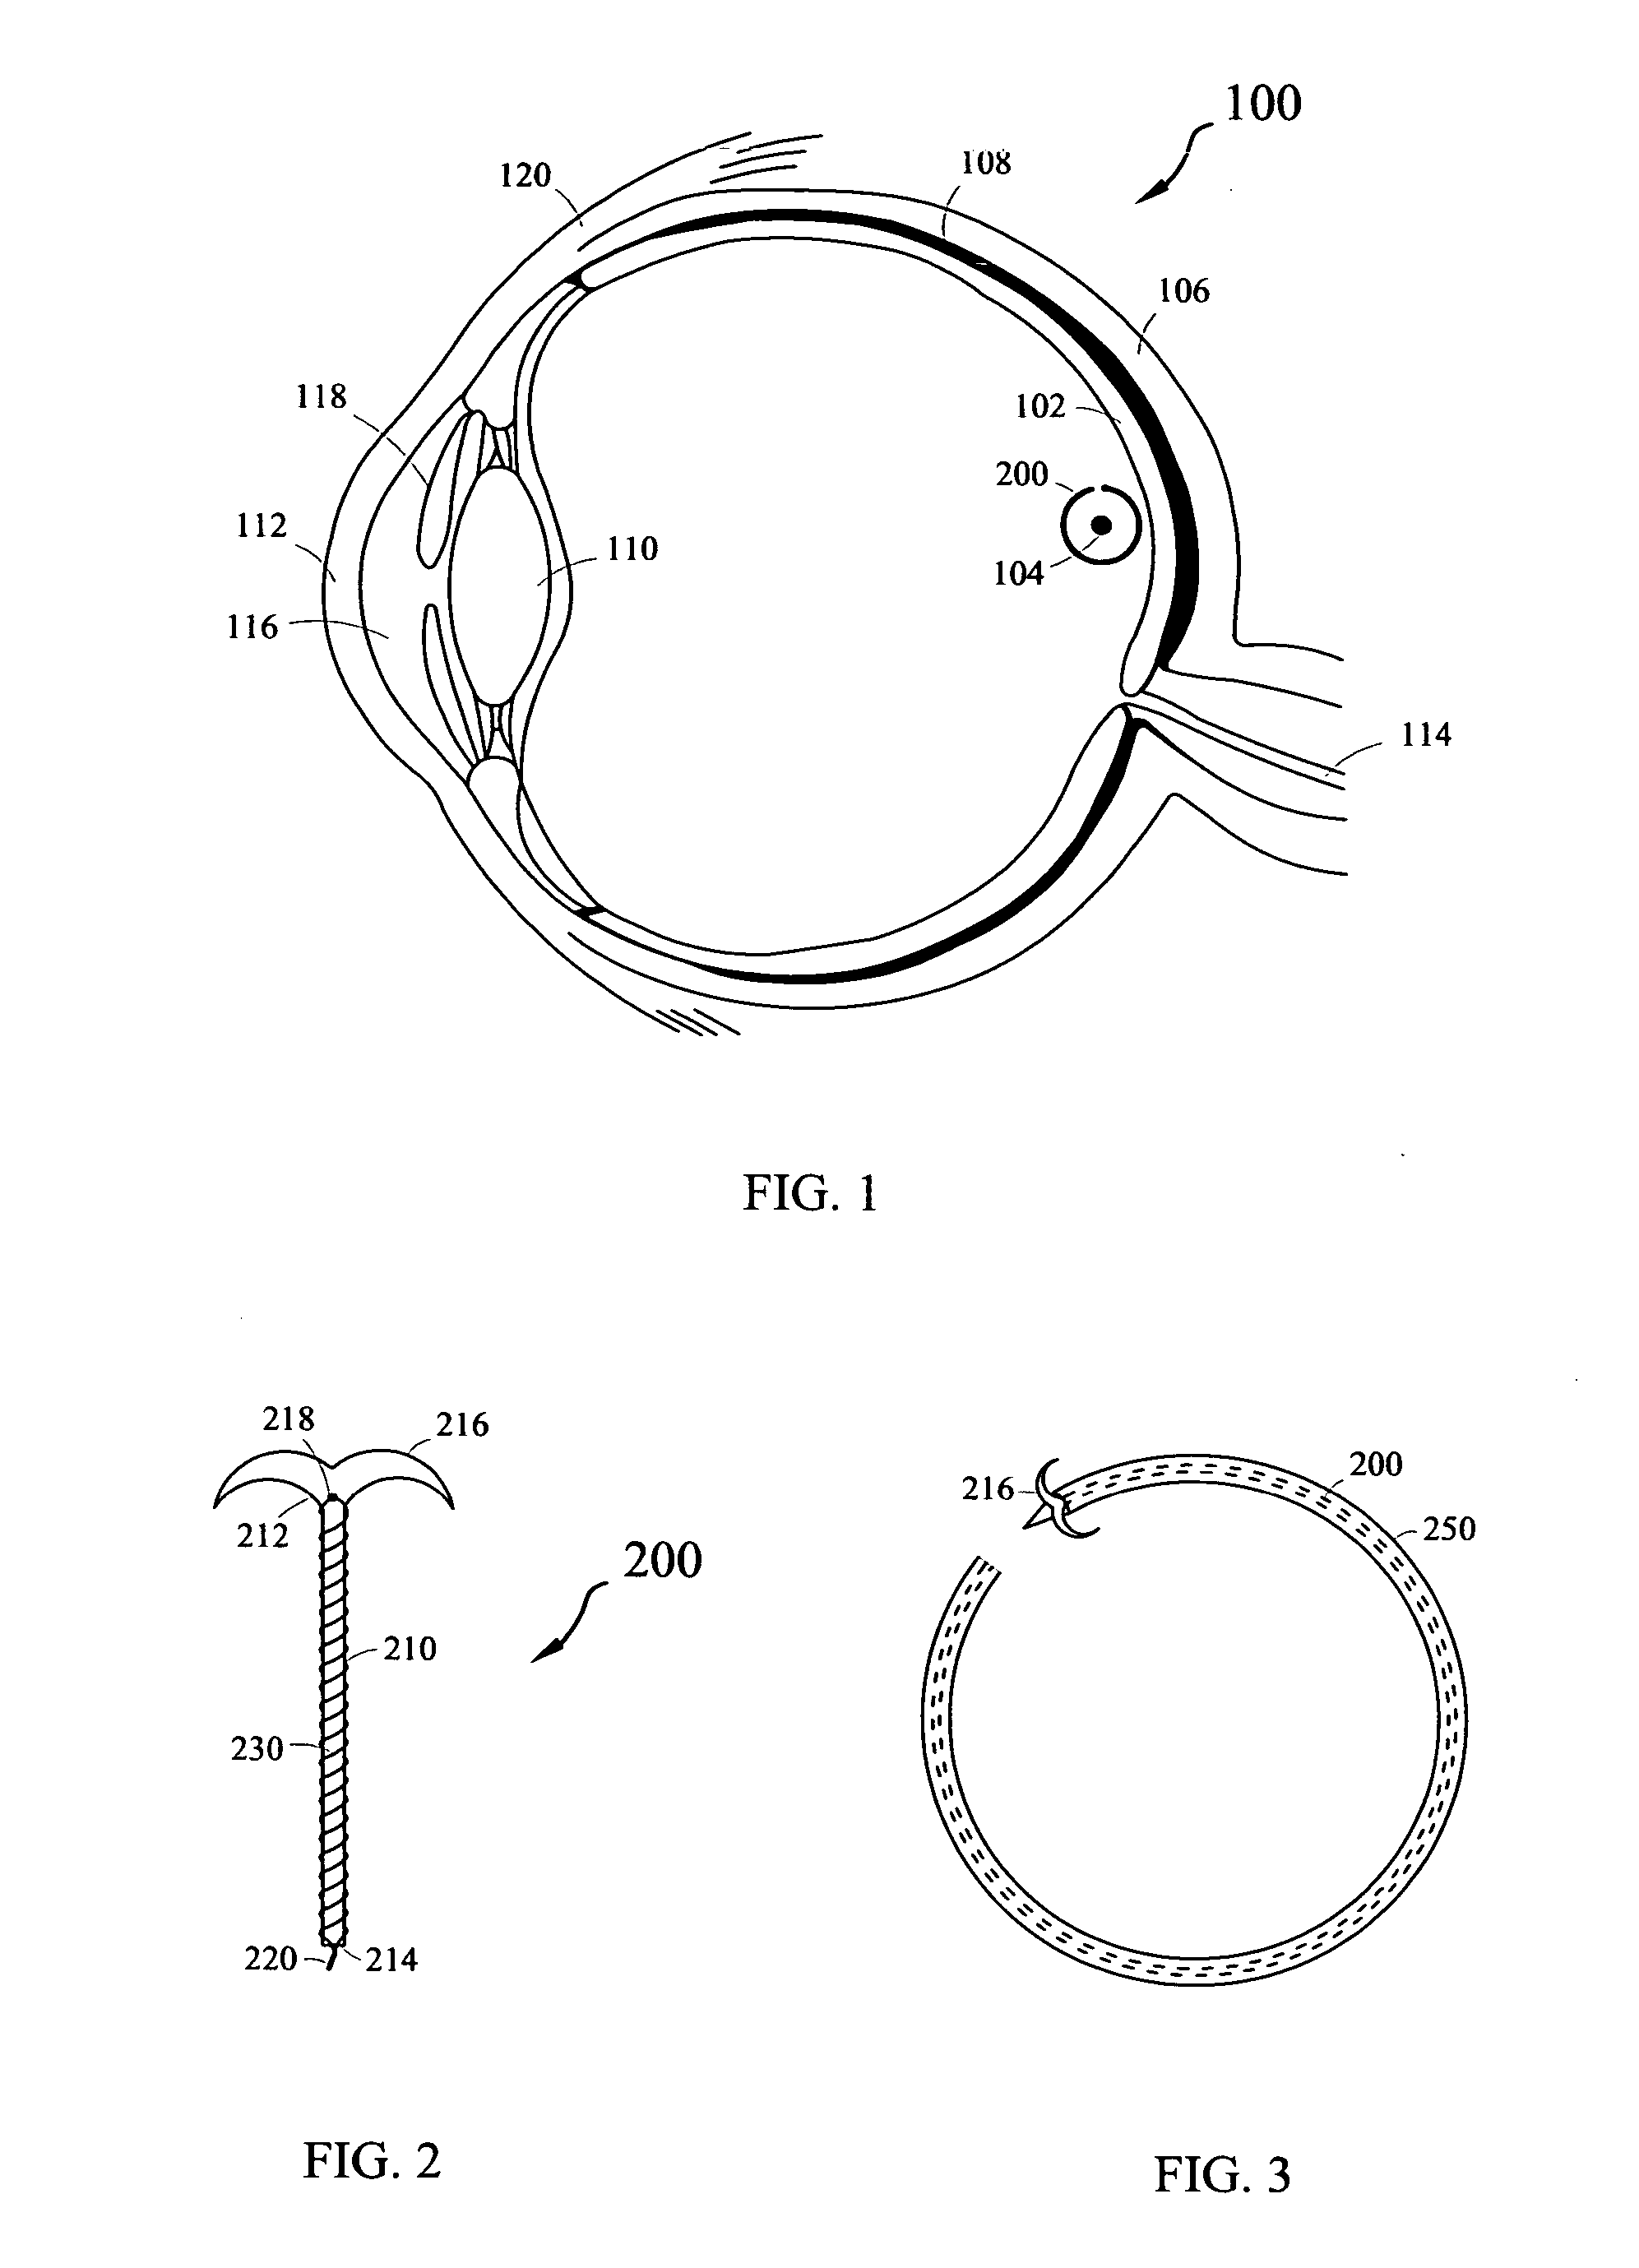 System for maintaining normal health of retinal cells and promoting regeneration of retinal cells